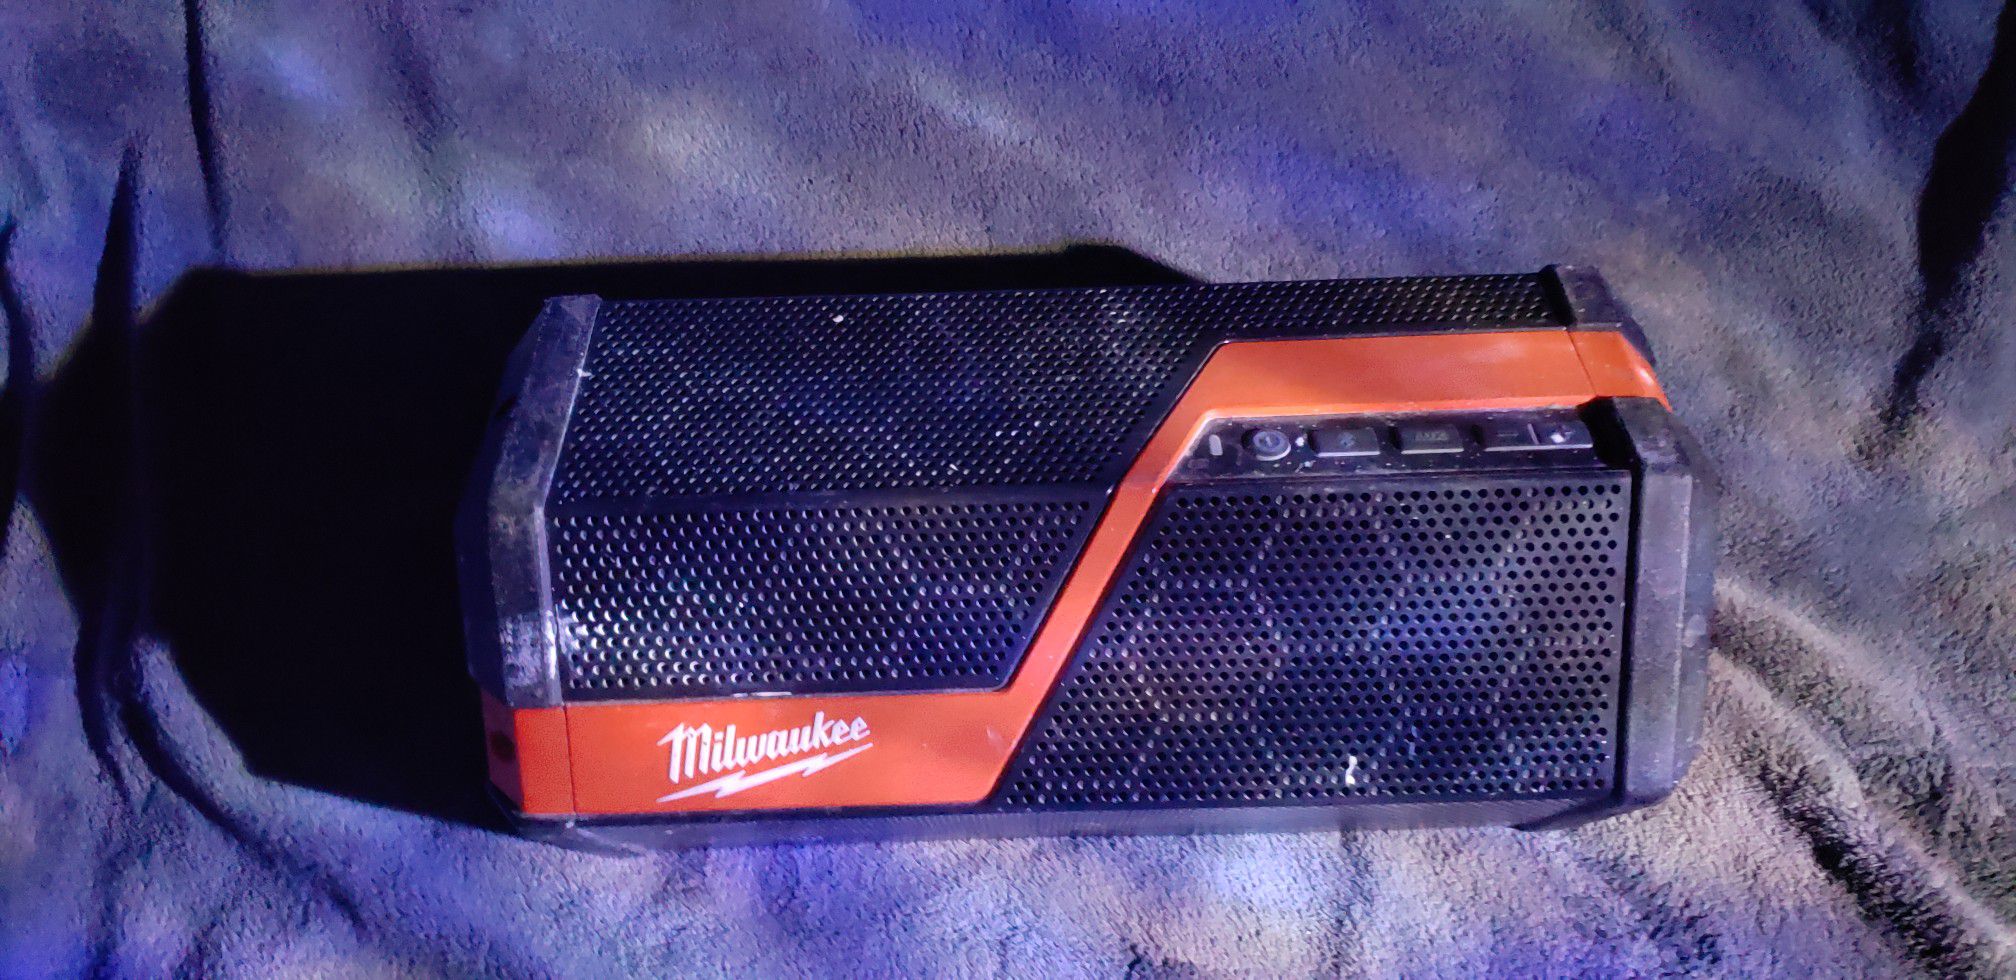 Milwaukee Radio with Red Ion Battery and Charger.